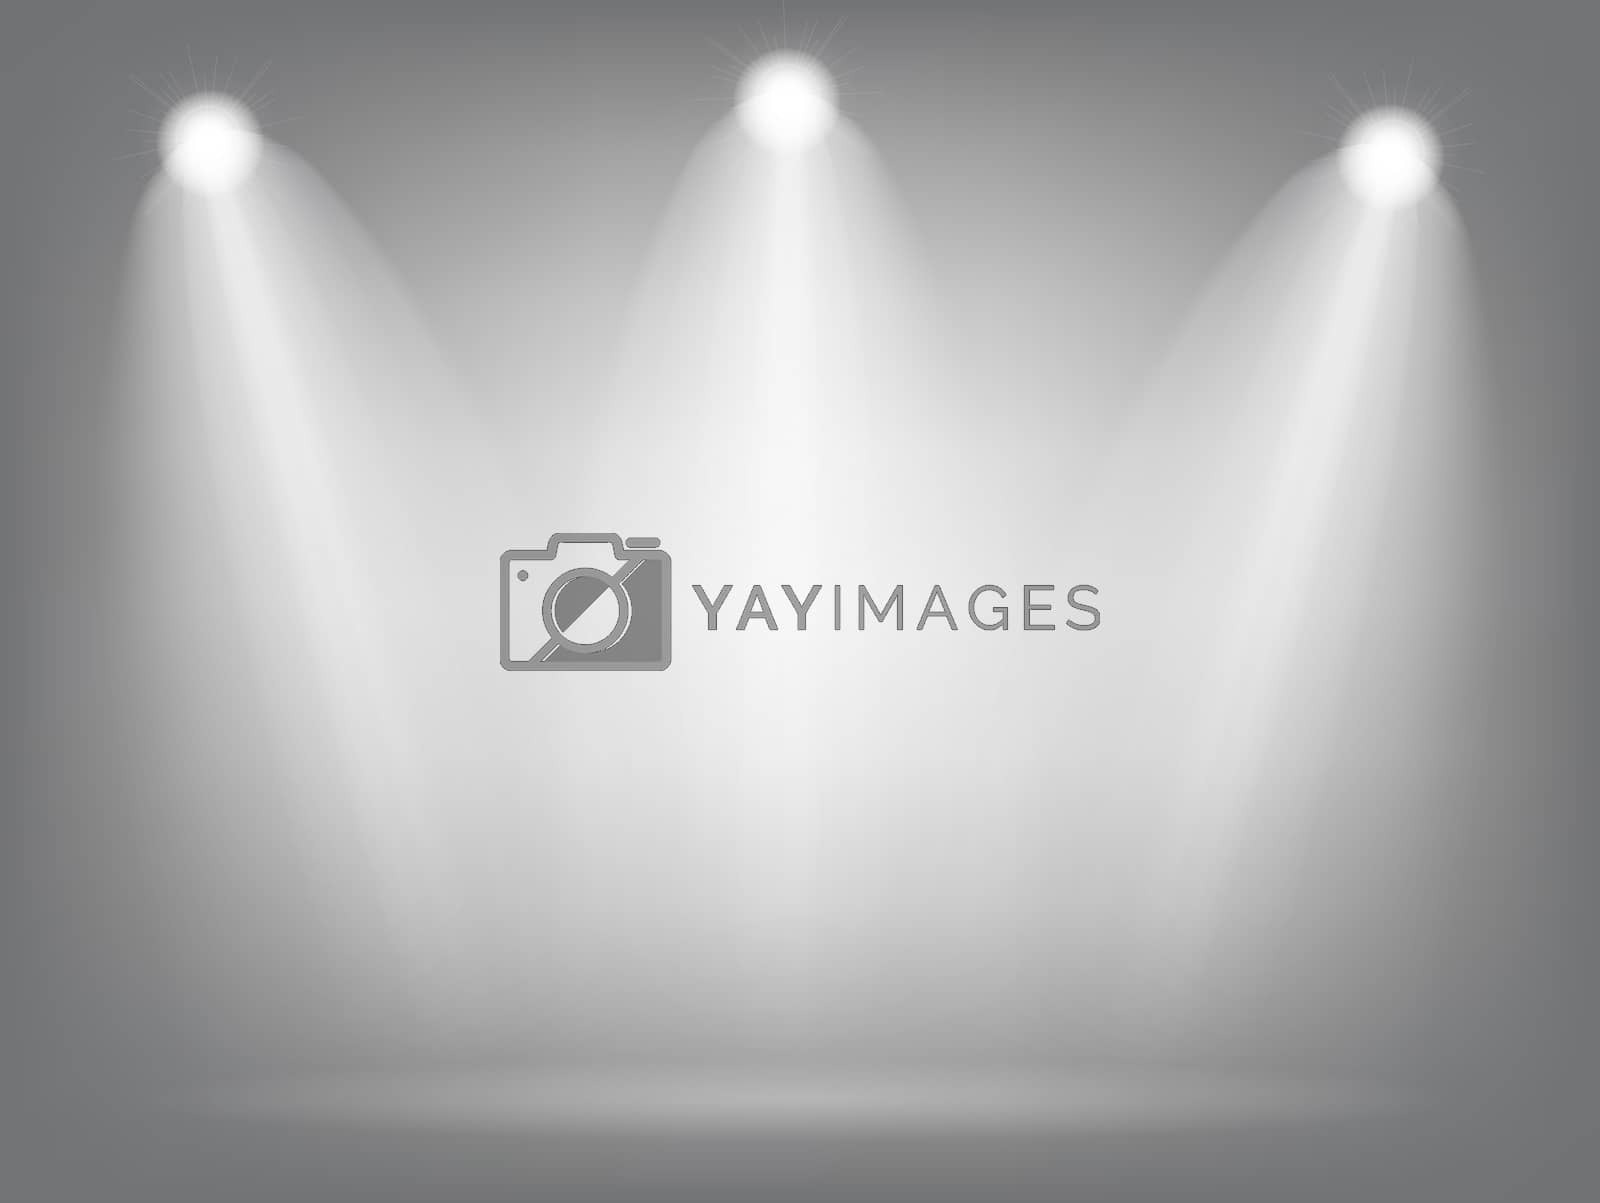 Royalty free image of Realistic Bright Projectors Lighting Lamp with Spotlights Lighting Effects with Transparency Background. Vector Illustration by yganko